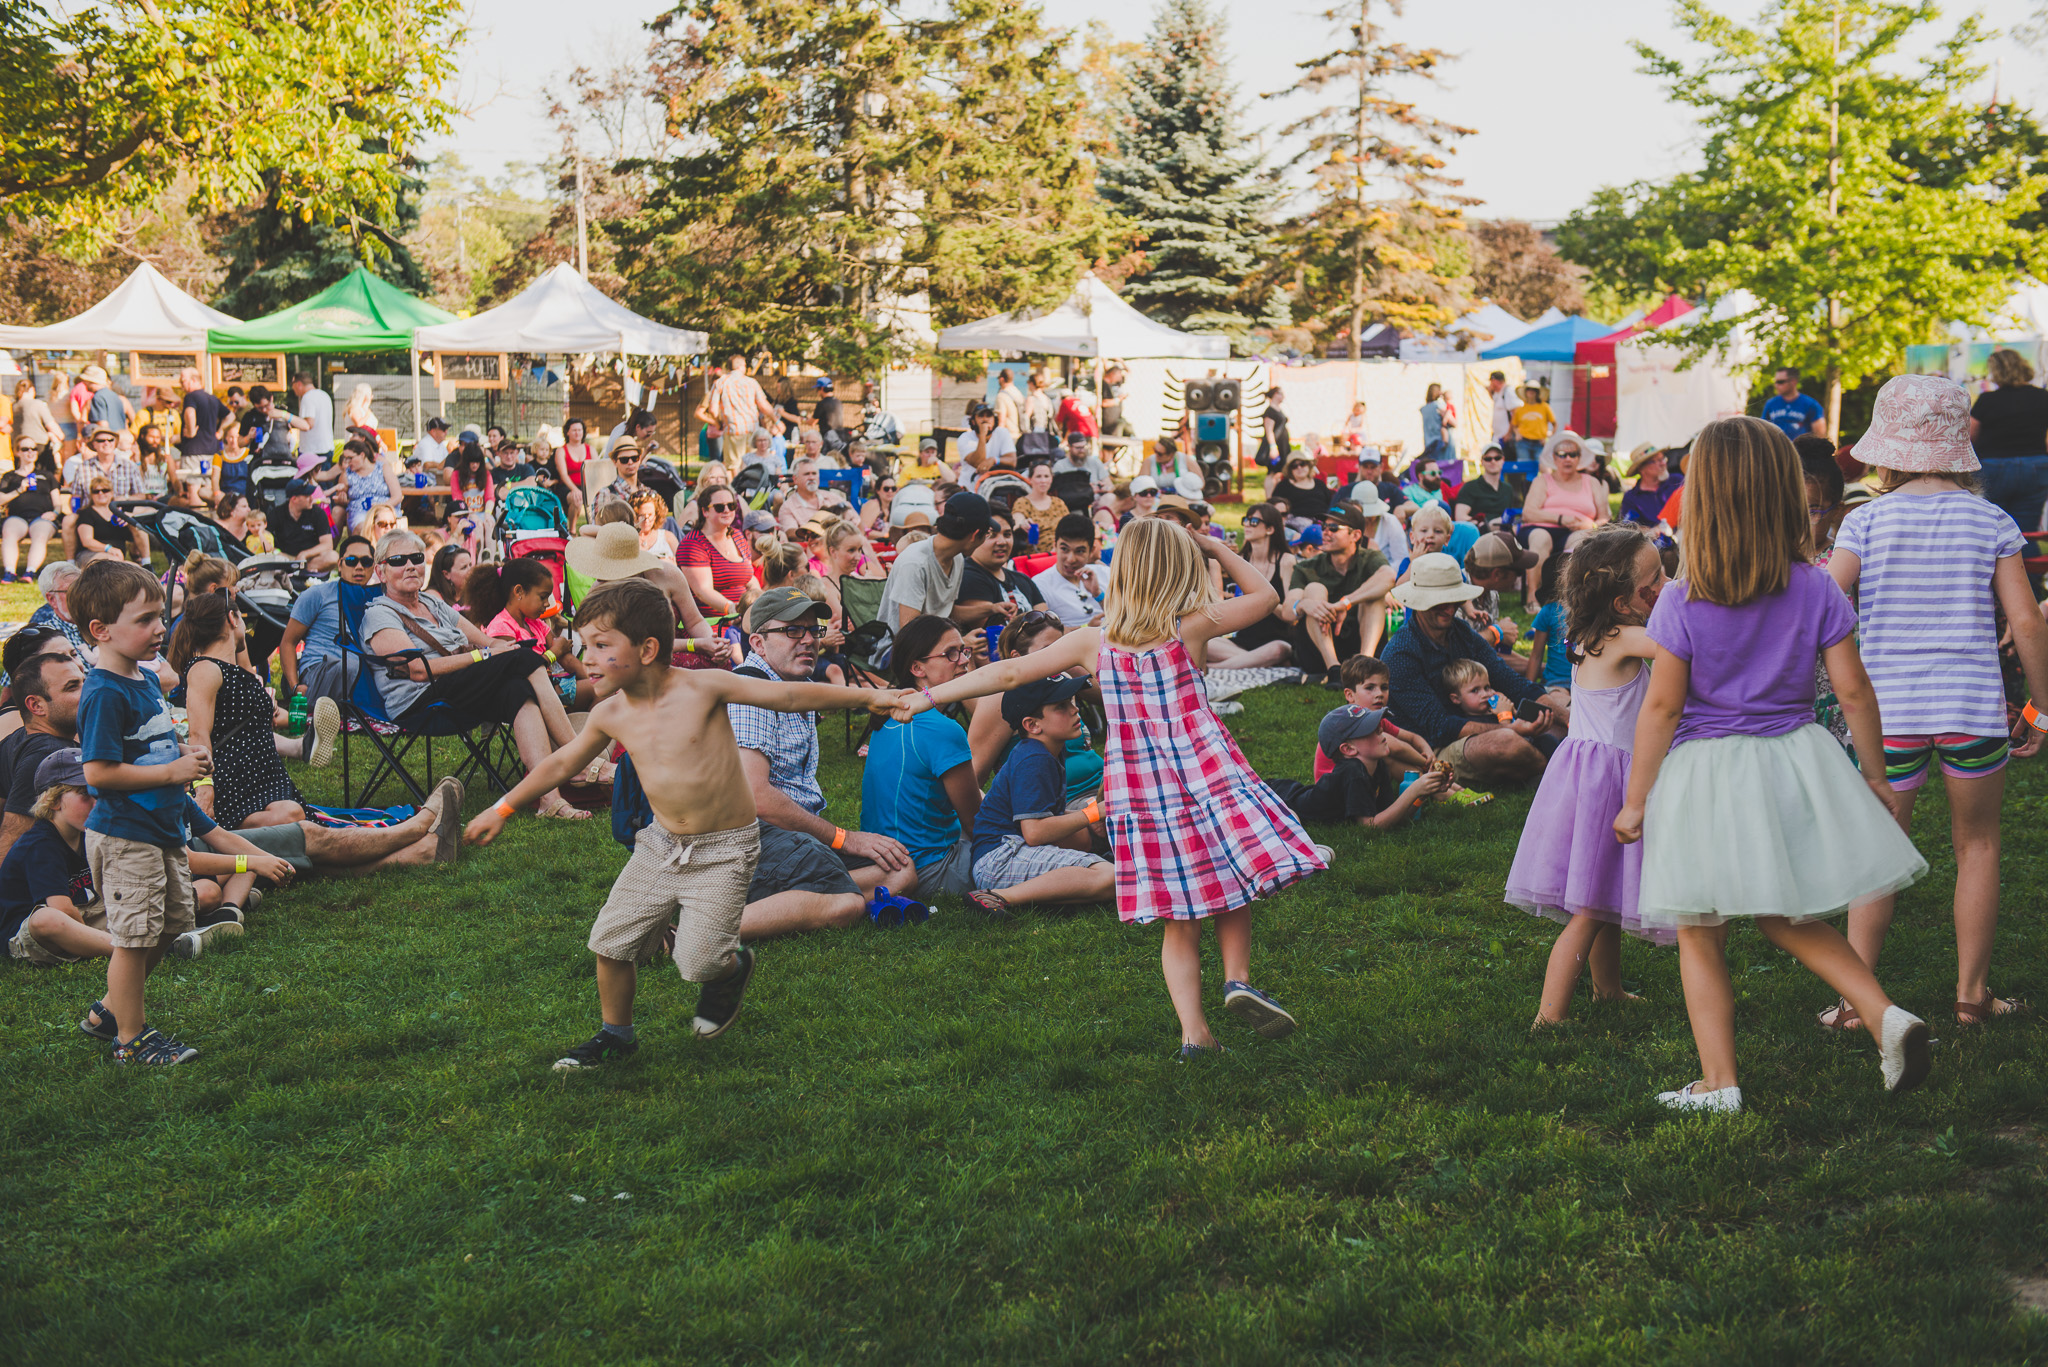 CULTIVATE FESTIVAL – Live music, local food and fun for the whole family